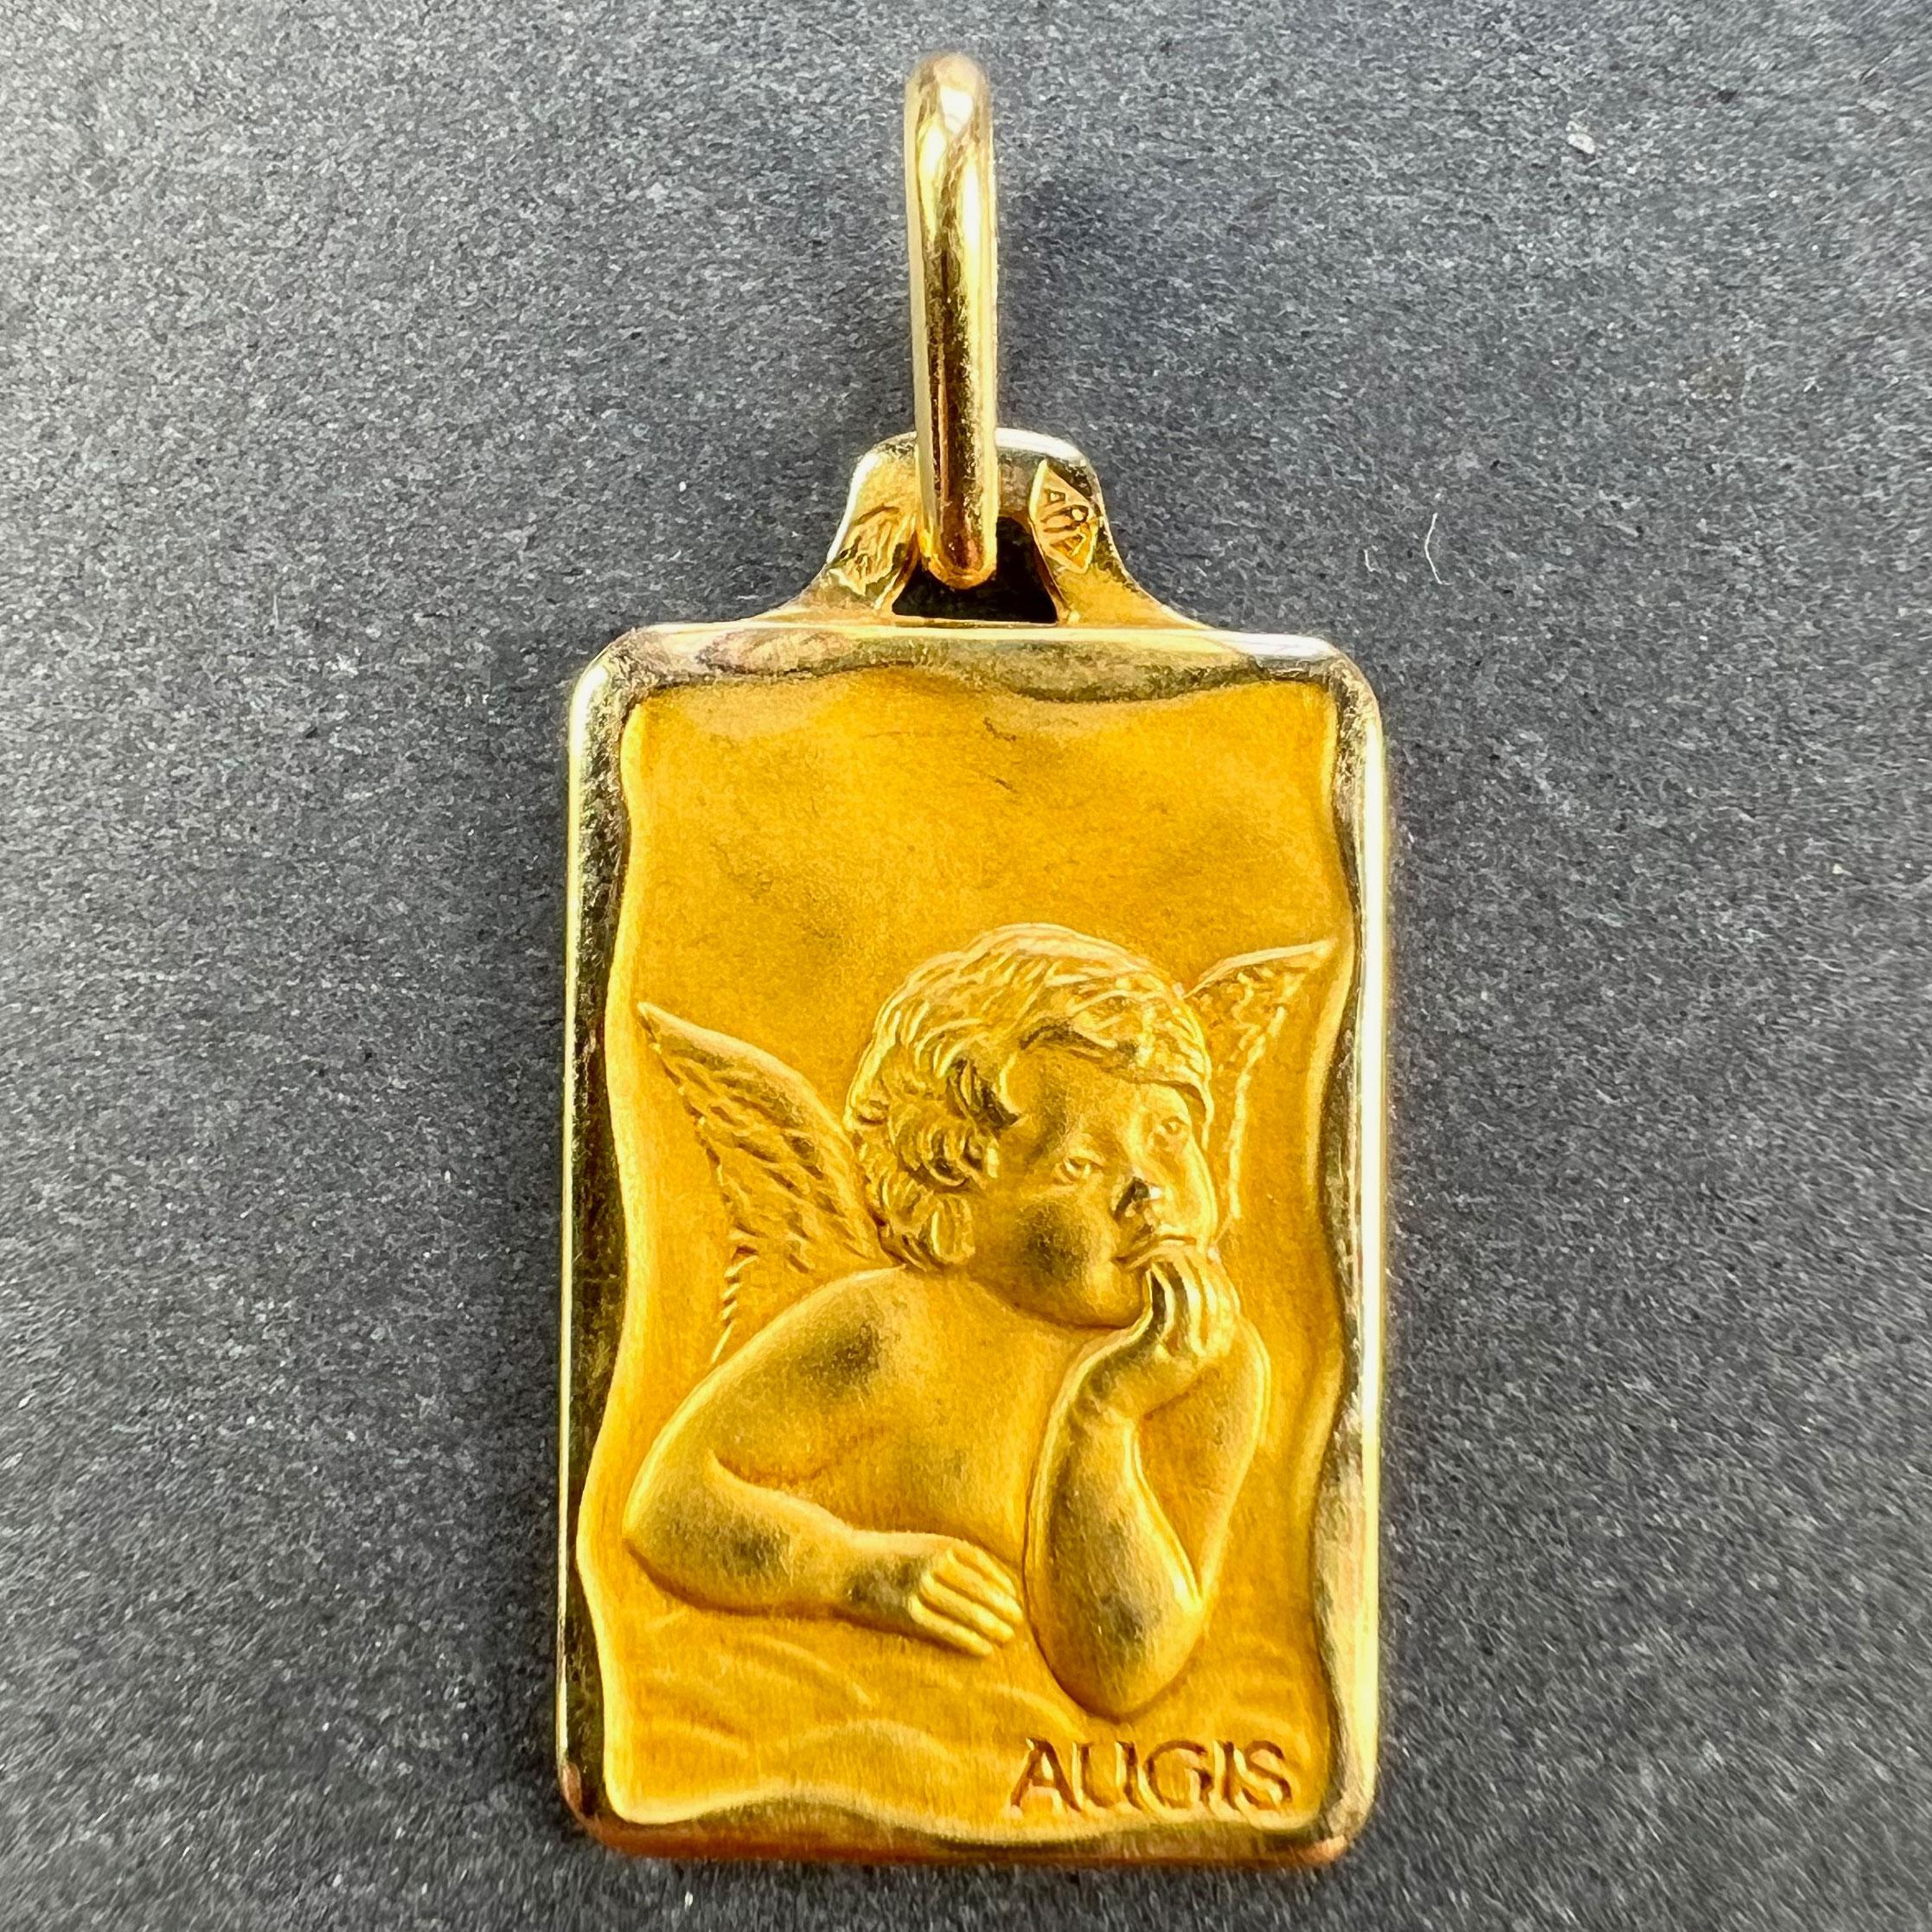 A French 18 karat (18K) yellow gold charm pendant designed as a rectangular medal depicting Raphael’s cherub. Signed Augis. Stamped with the eagle mark for 18 karat gold and French manufacture with an unknown maker's mark.

Dimensions: 2 x 1.1 x 0.1